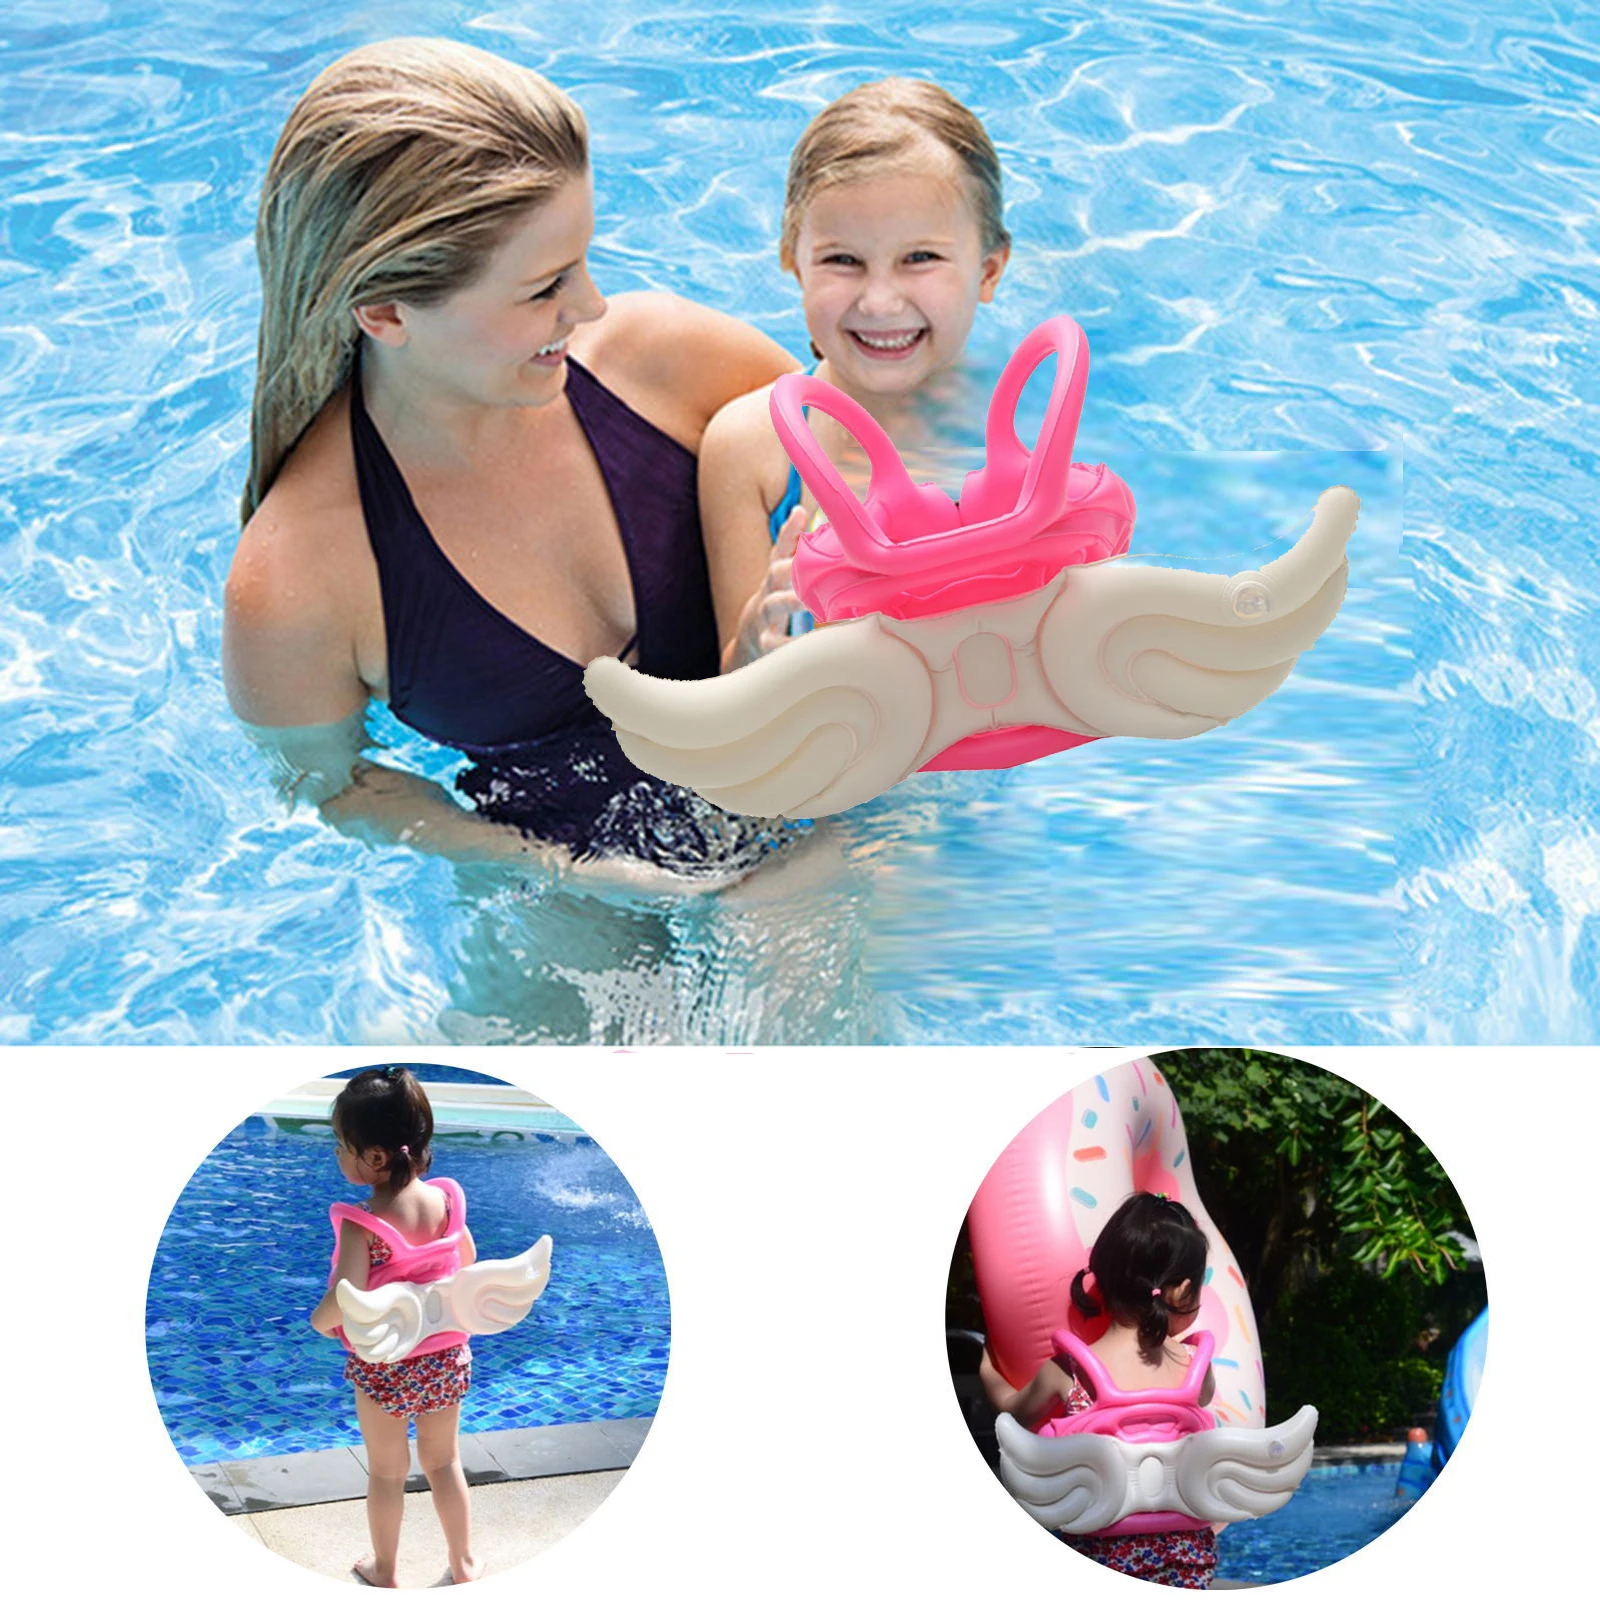 Deluxe Kids Swimming Pool Floats Baby Life Vest Swim Ring Inflatable Buoyancy Aids Beach Pool Photograph Angle Wing Swim Circle